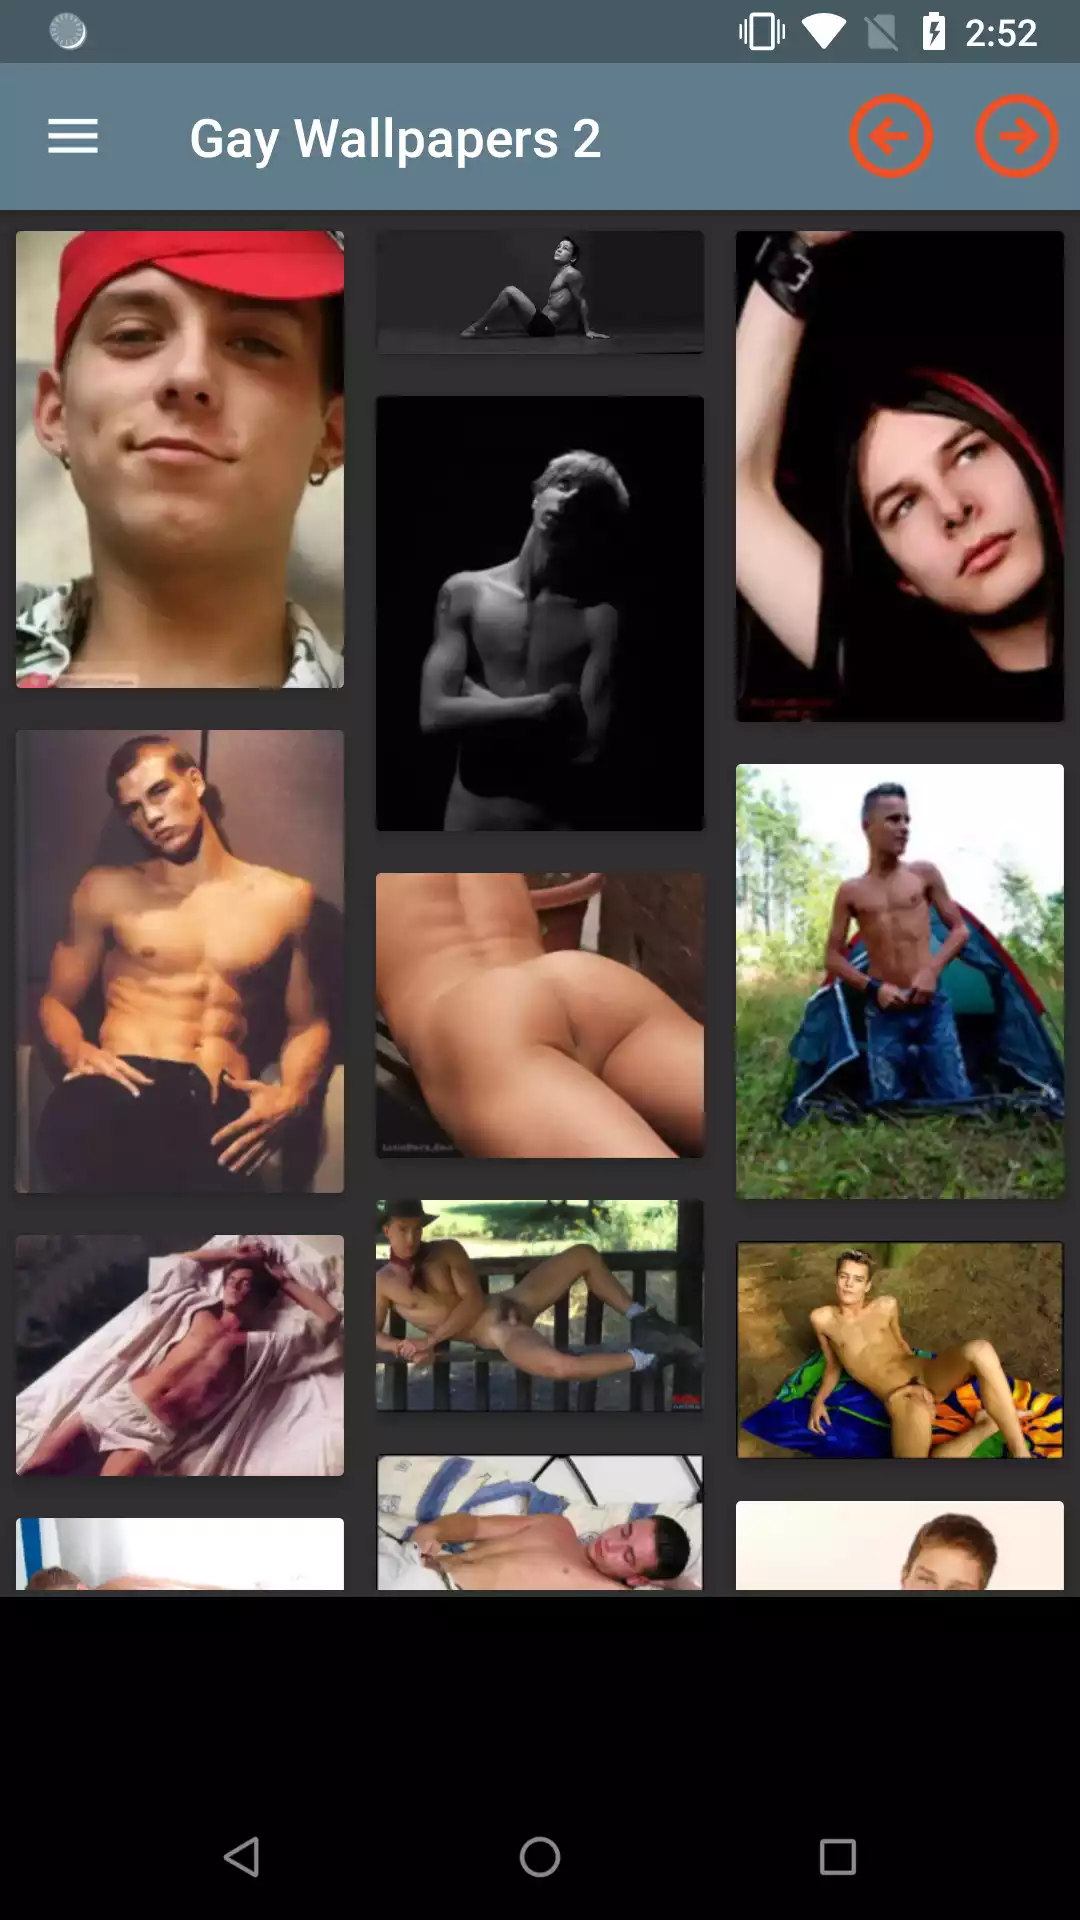 Gay Wallpapers wallpaper,panties,porn,futanari,men,hentie,gay,ebony,sexy,backgrounds,shemale,wallpapers,adult,apk,pic,app,shemales,download,apps,hentai